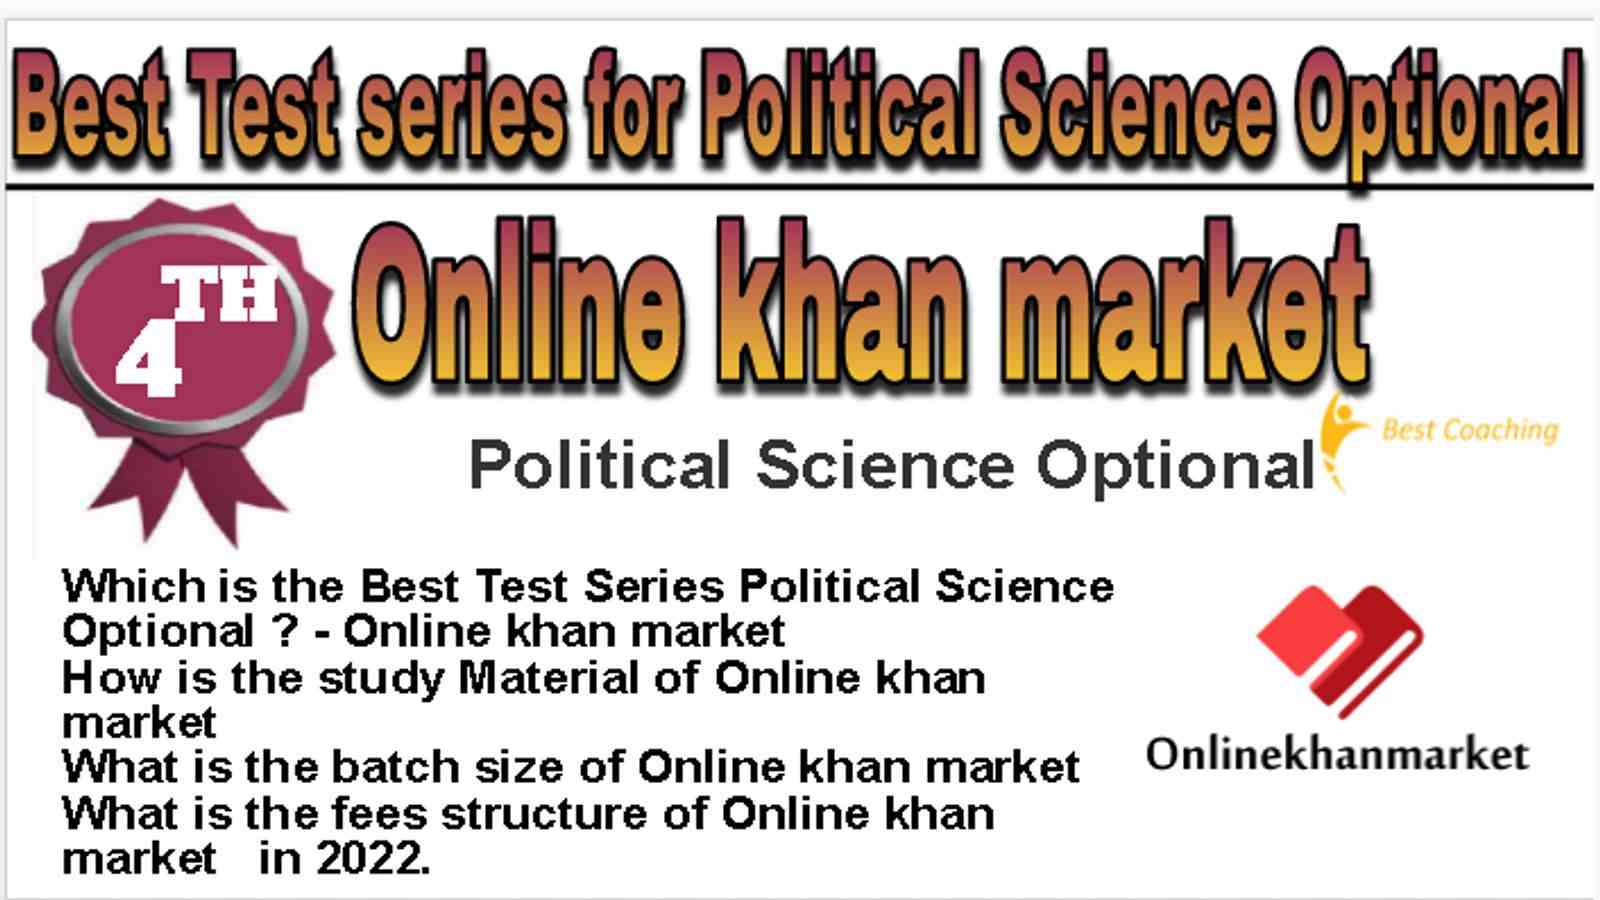 Rank 4 Best Test series for Political Science Optional